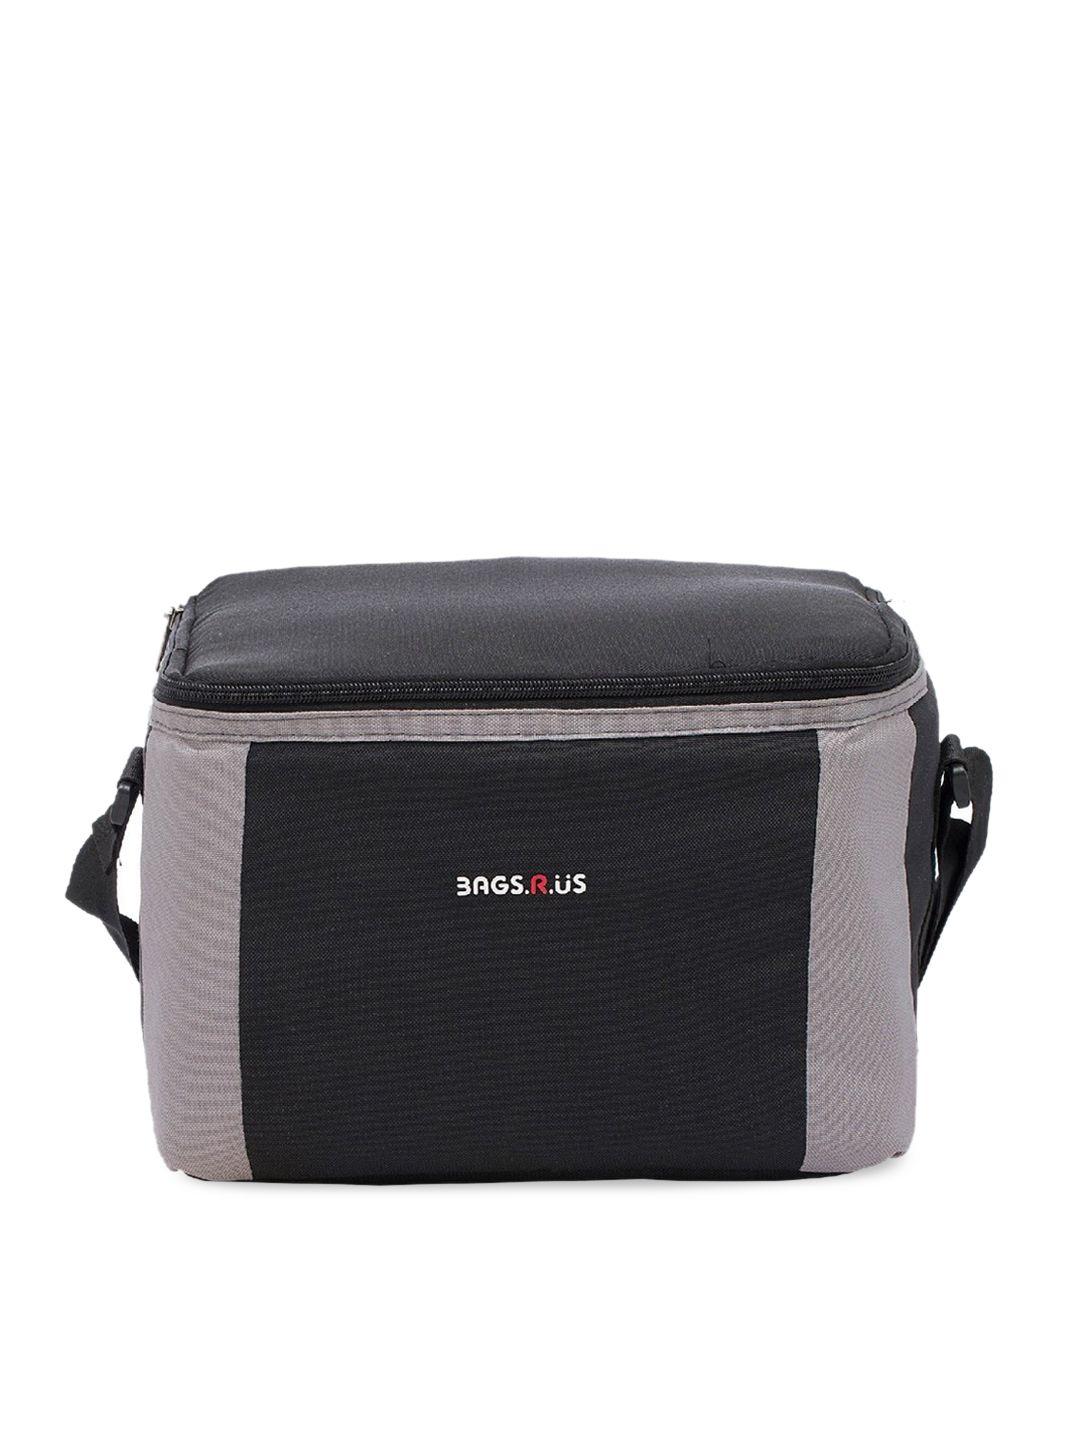 bags.r.us black insulated chiller lunch bag with ice pack